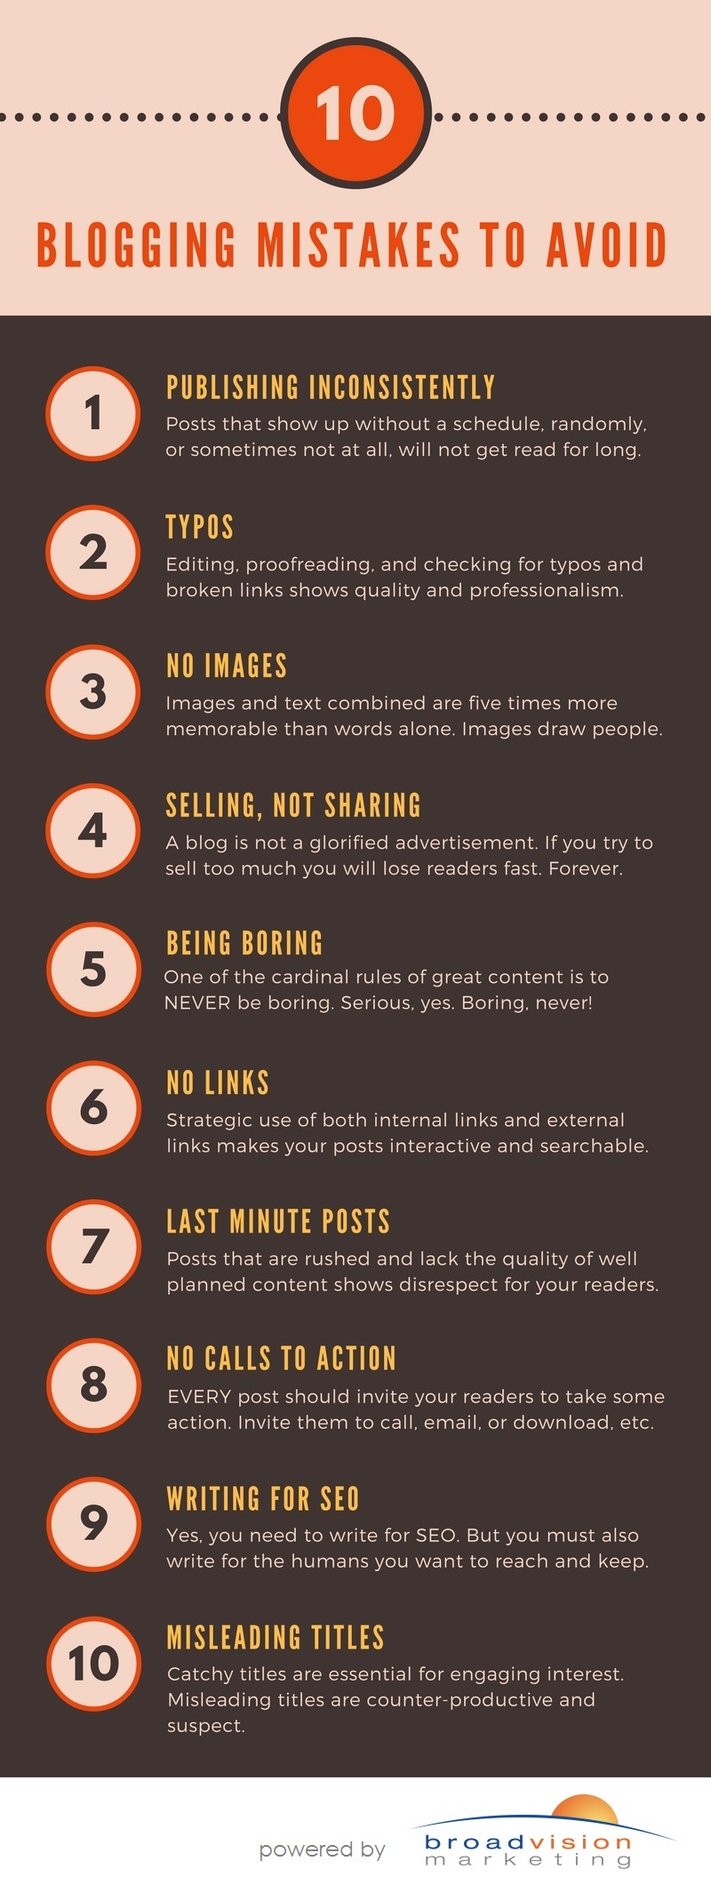 10-blogging-mistakes-you-need-to-avoid-infographic